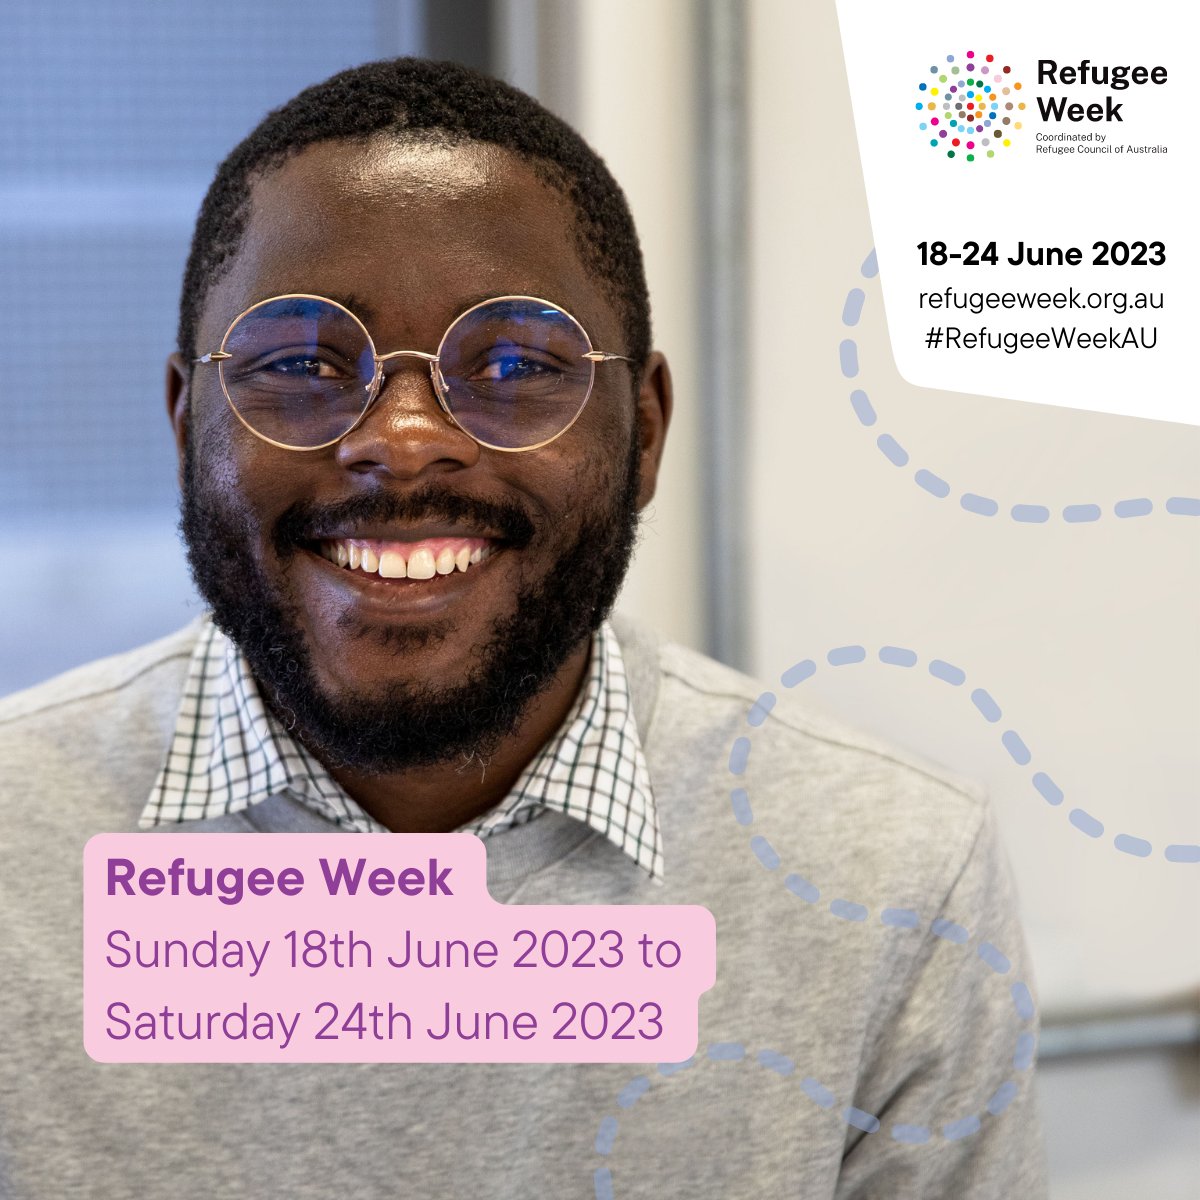 Refugee week kicks off Sunday 18th June 2023 through to Saturday 24th June 2023. 

It's time to celebrate the enormous contributions refugees have made to our society. 

#RefugeeWeekAU #findingfreedom #refugees #culturaldiversity #language #socialinclusion #community